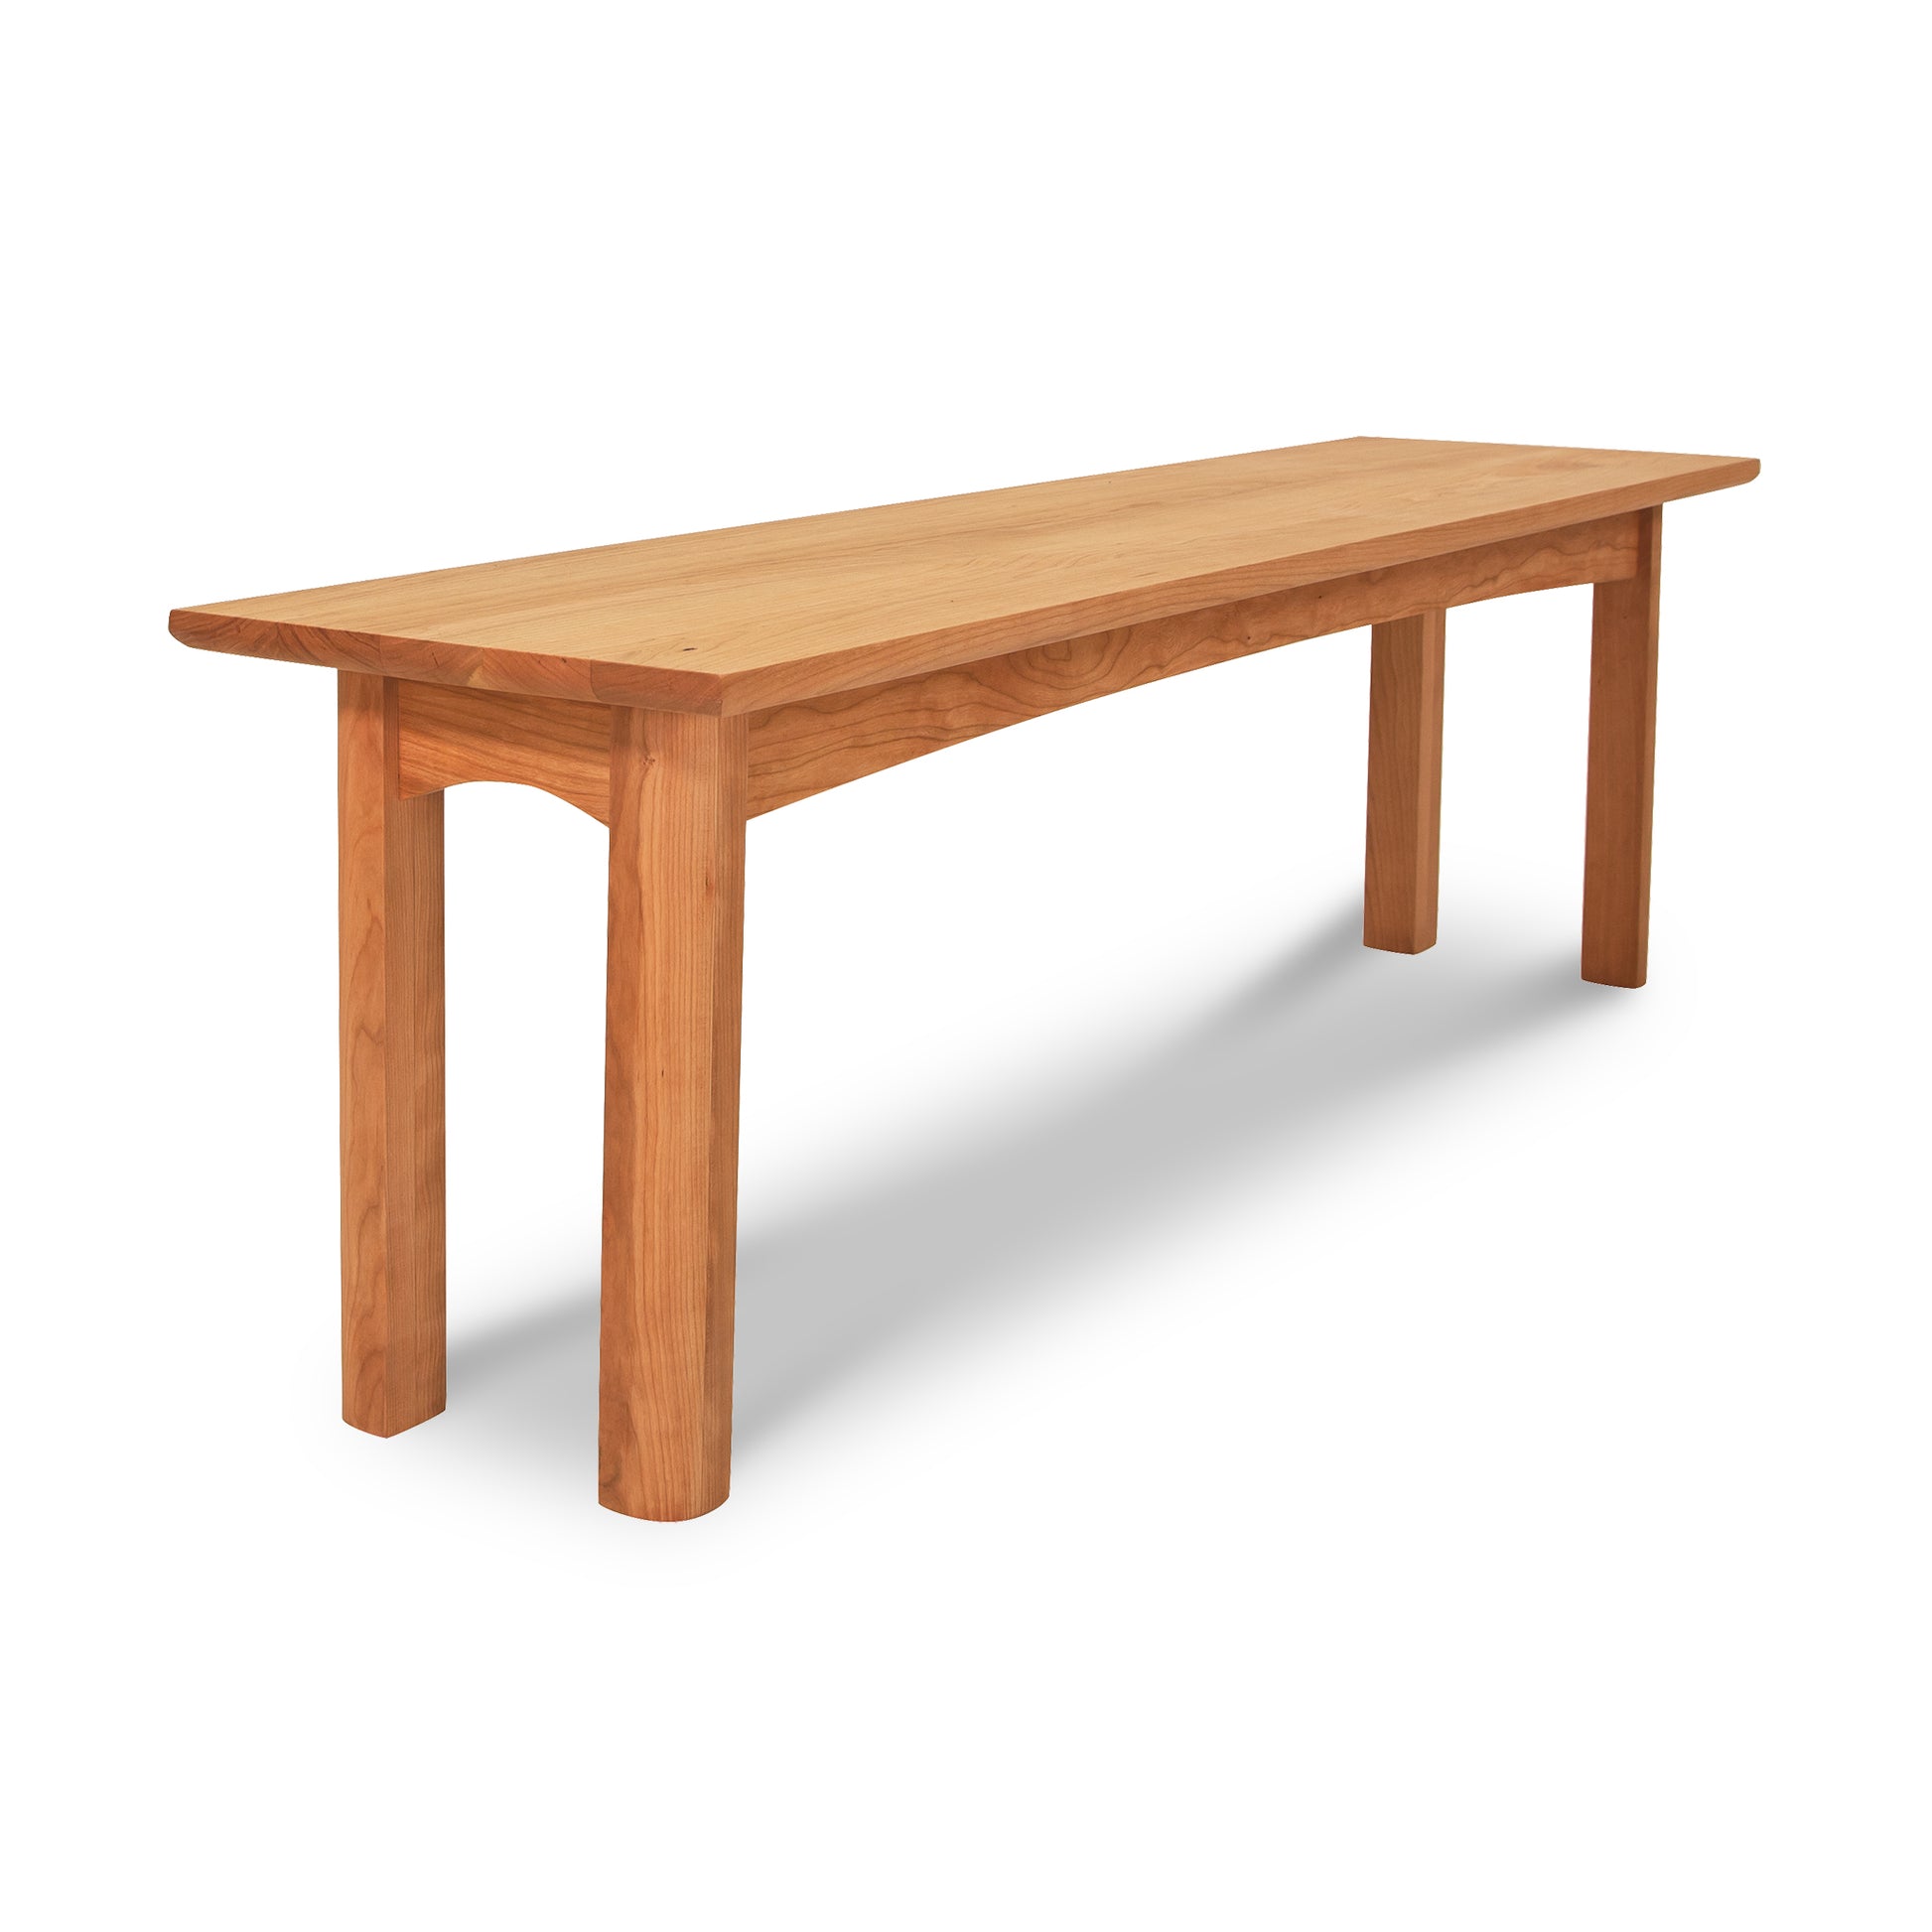 A Vermont Furniture Designs Heartwood Shaker Bench against a white background.